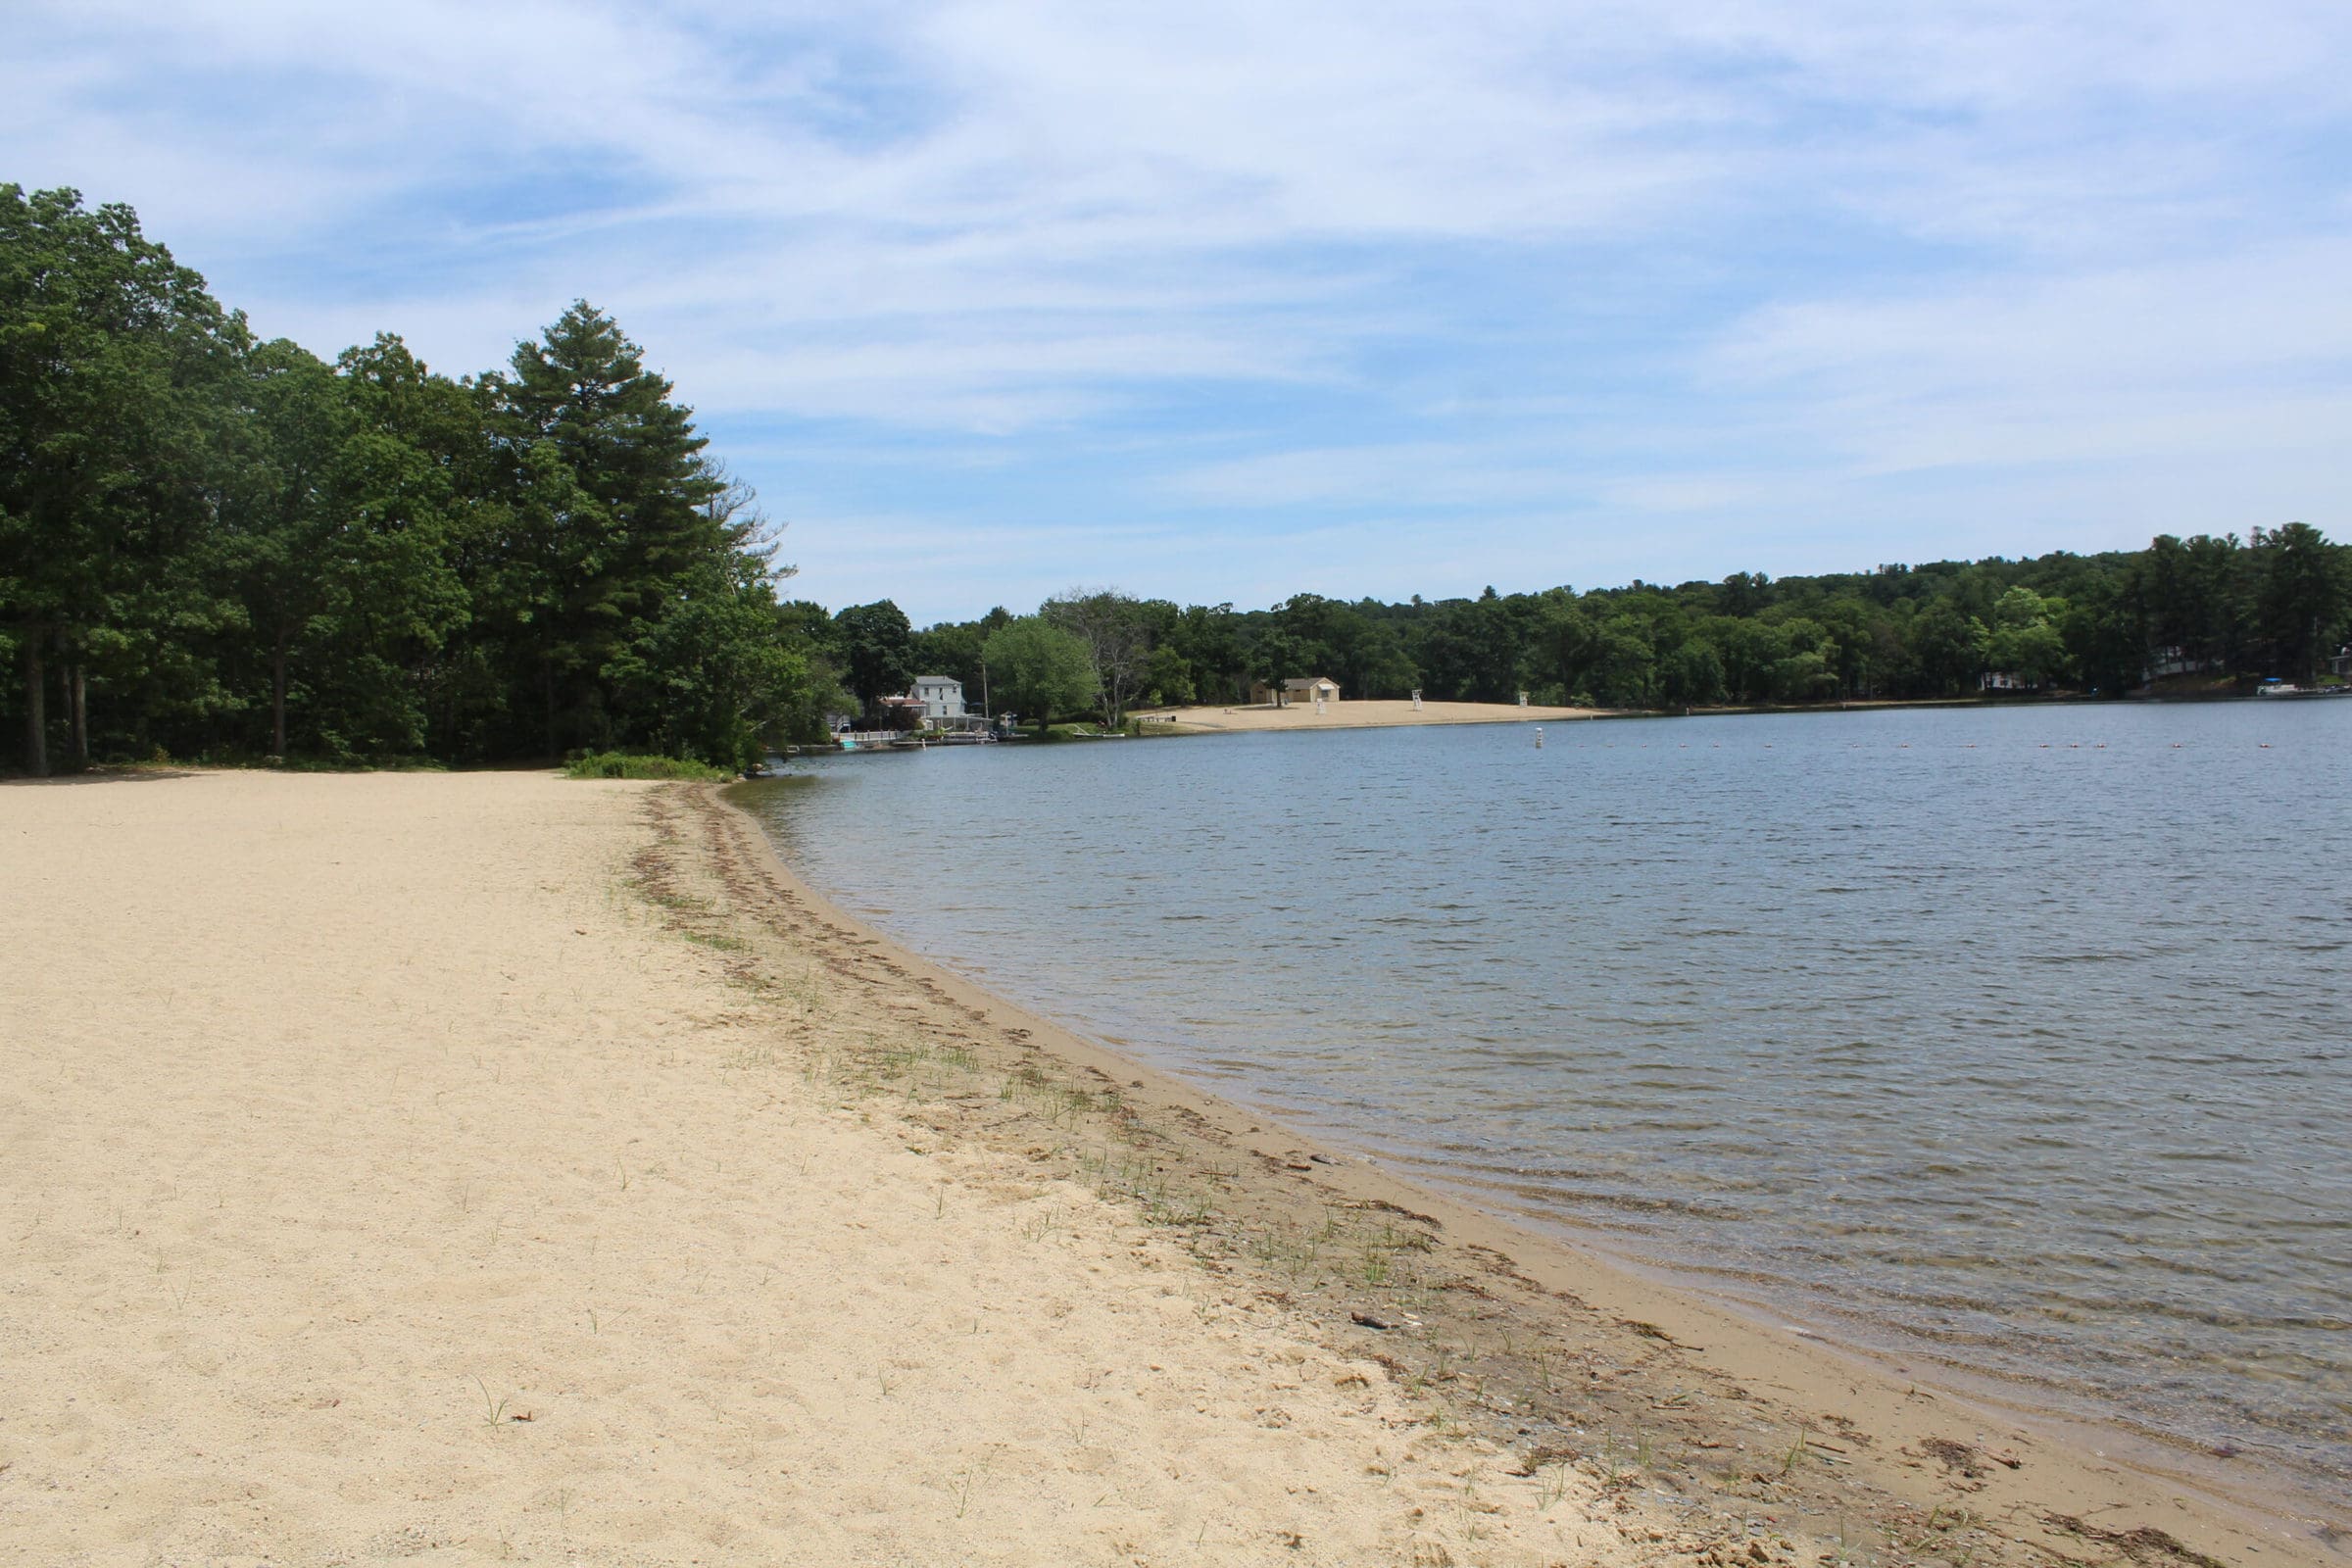 With Centennial Beach reopening, Select Board addresses parking concerns